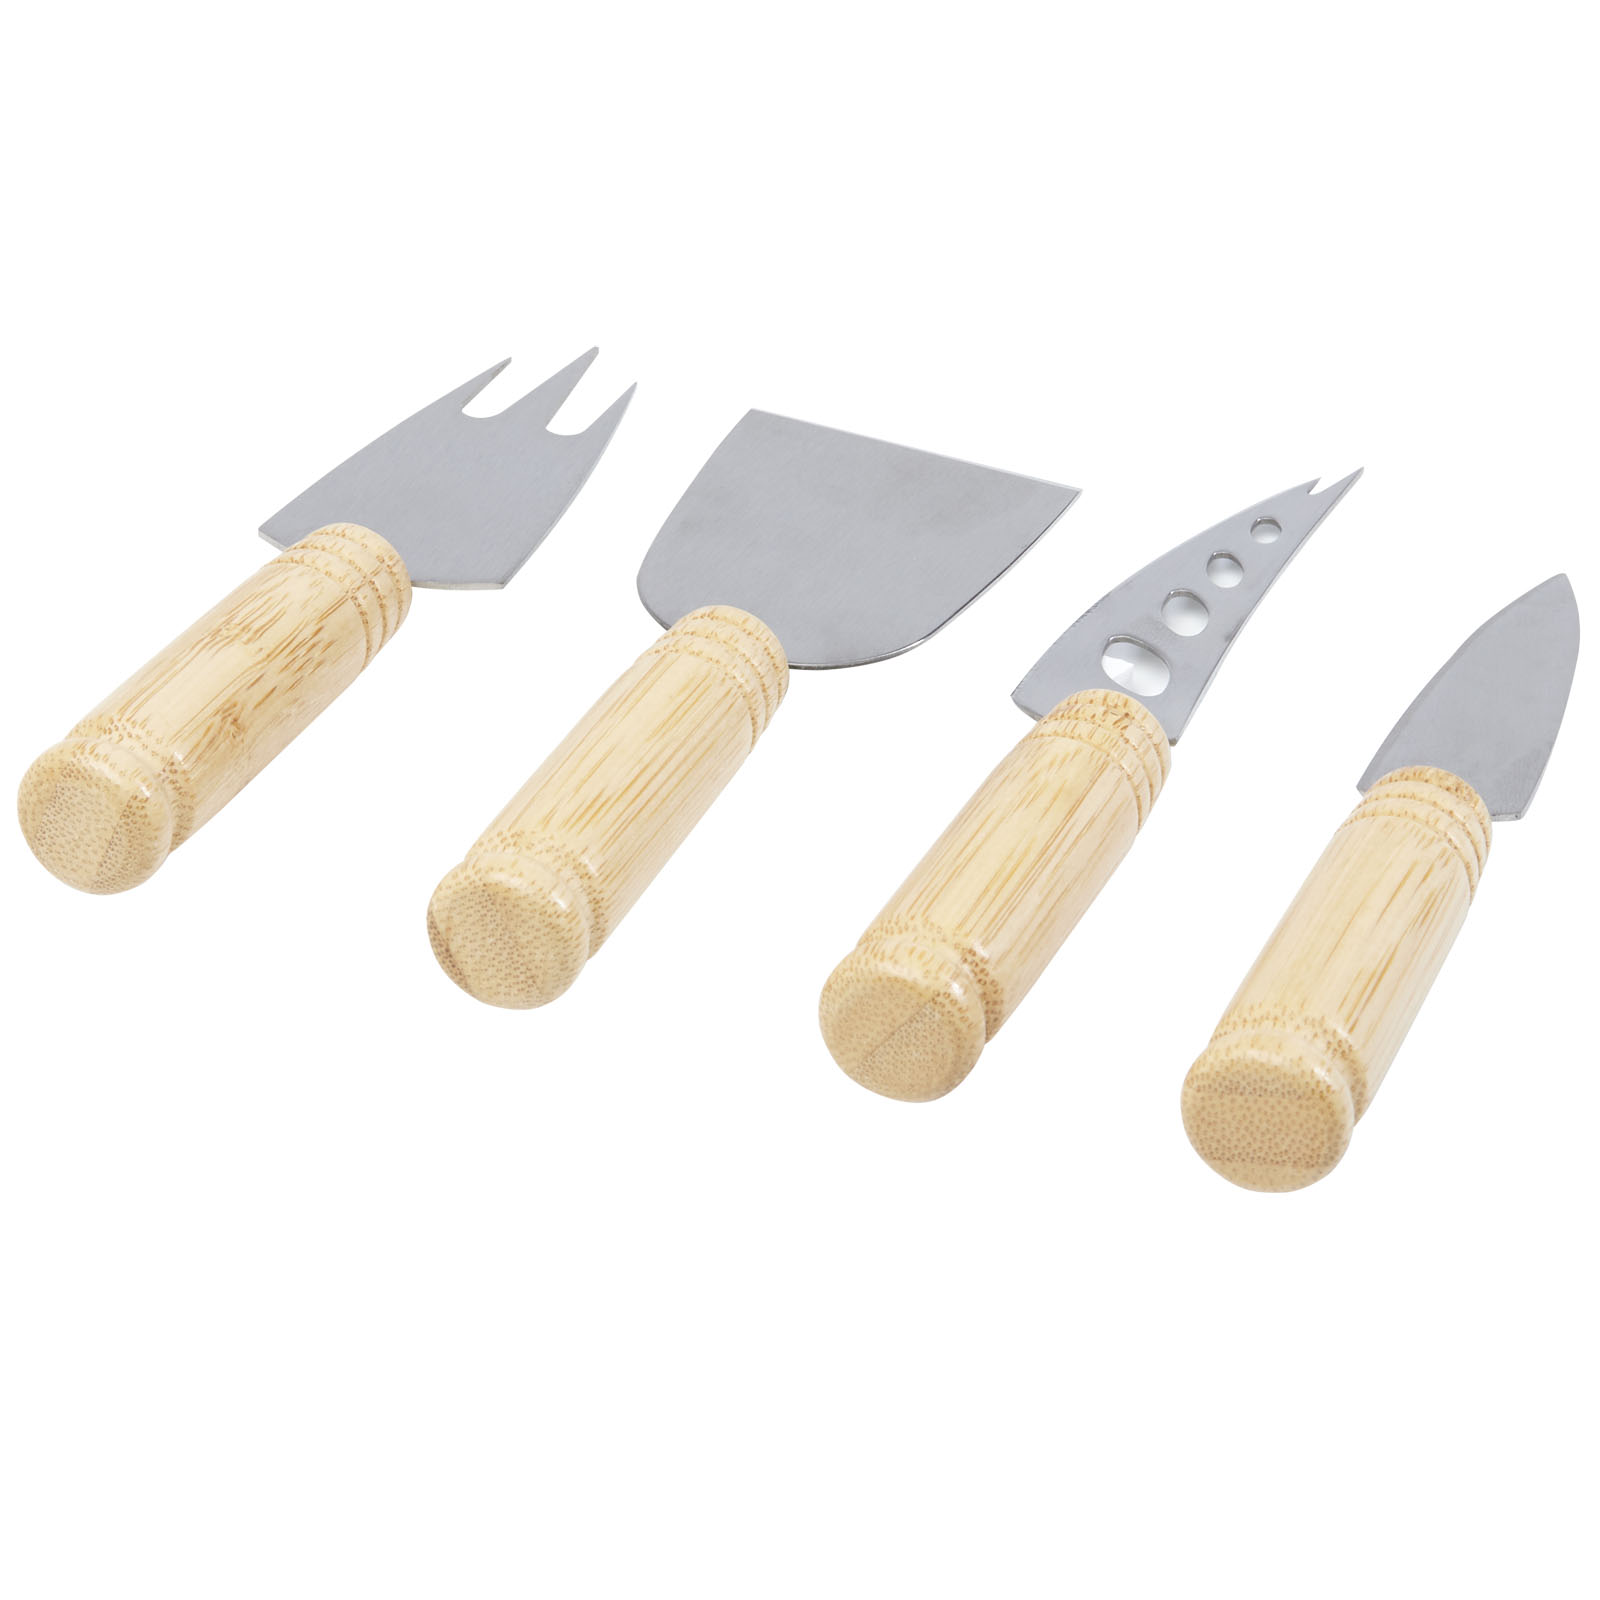 Home & Kitchen - Cheds 4-piece bamboo cheese set